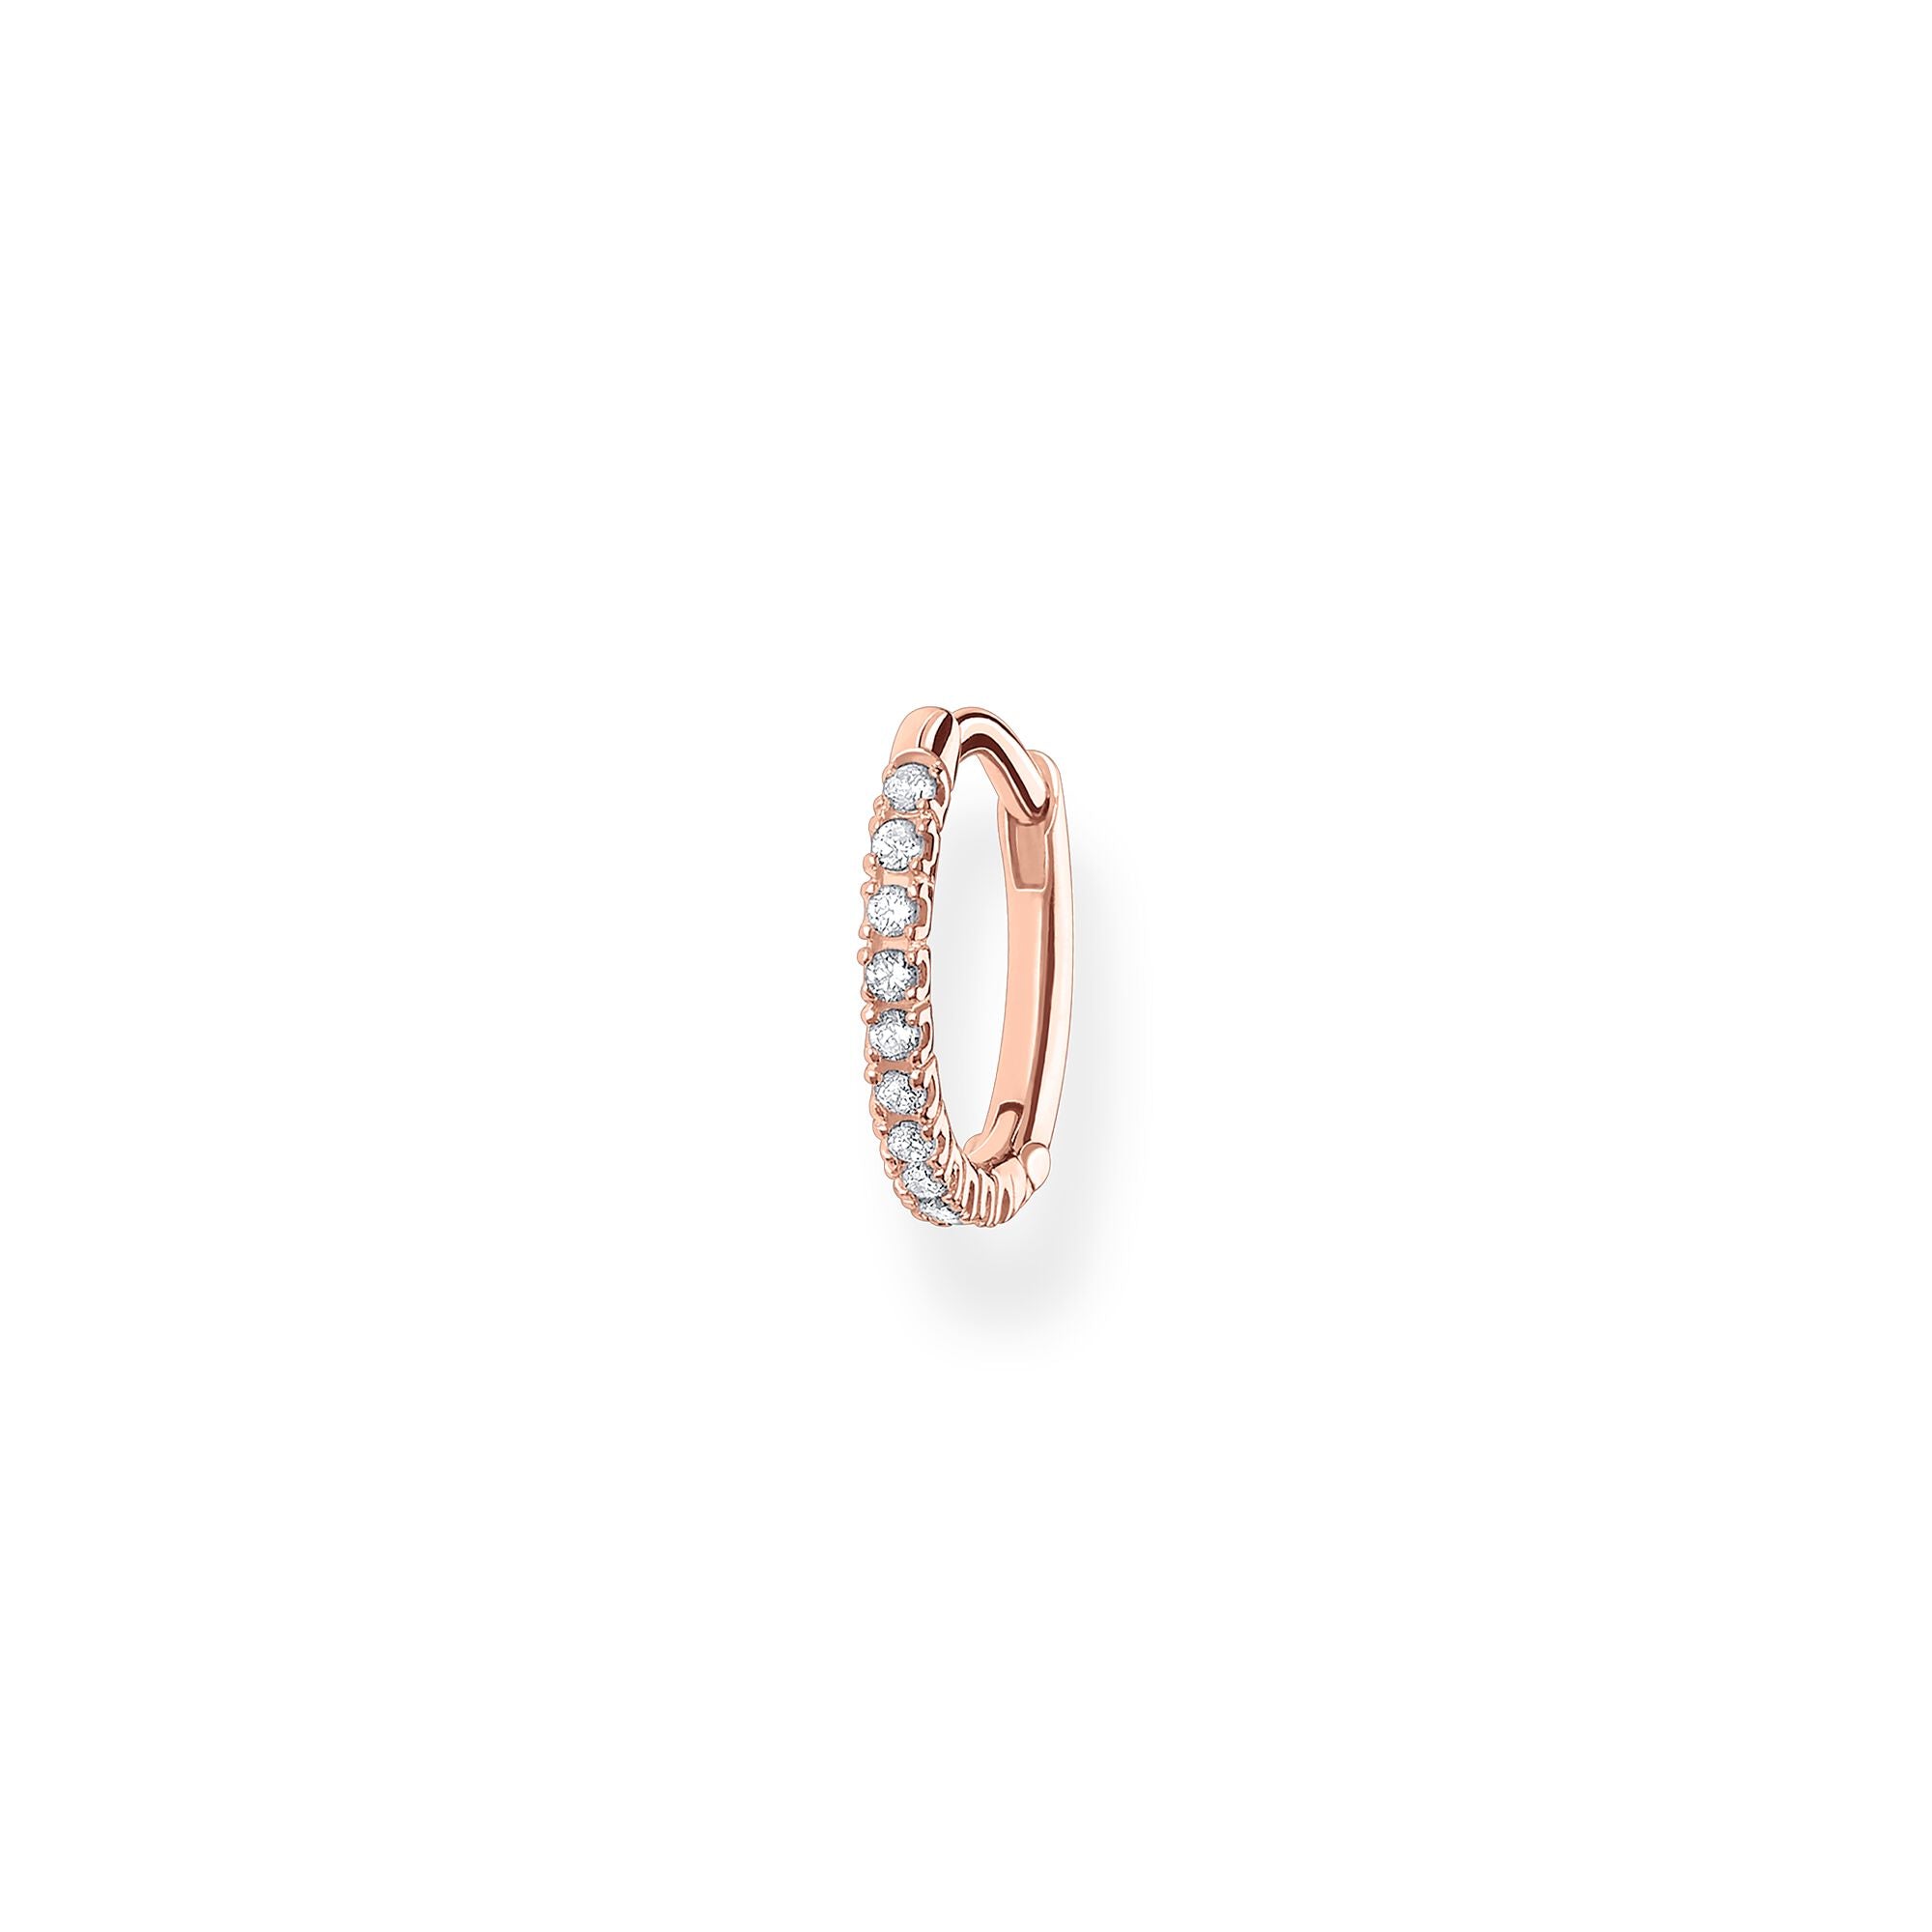 18 karat rose gold plated sterling silver & clear cubic zirconia clicker single earring by Thomas Sabo